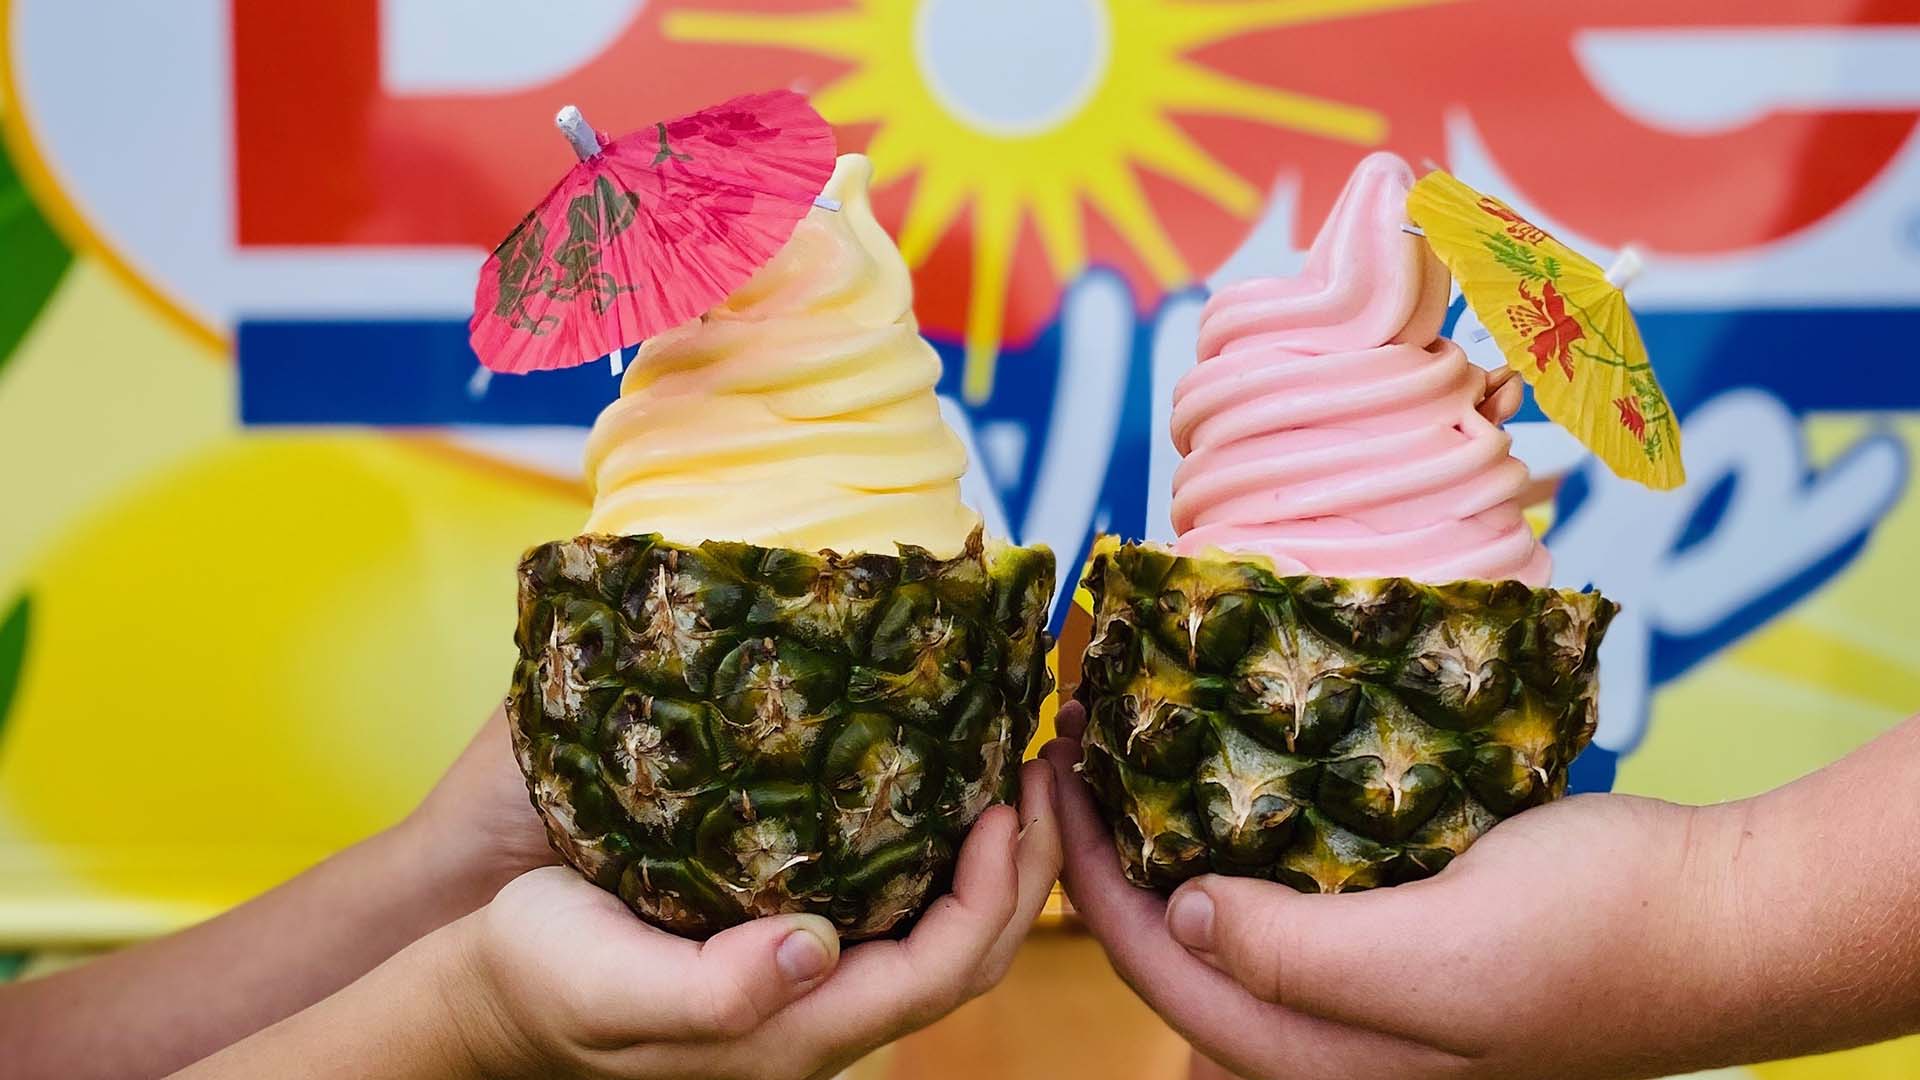 Disneyland's Famed Dole Whip Soft Serve Is Coming to Sydney for the First Time